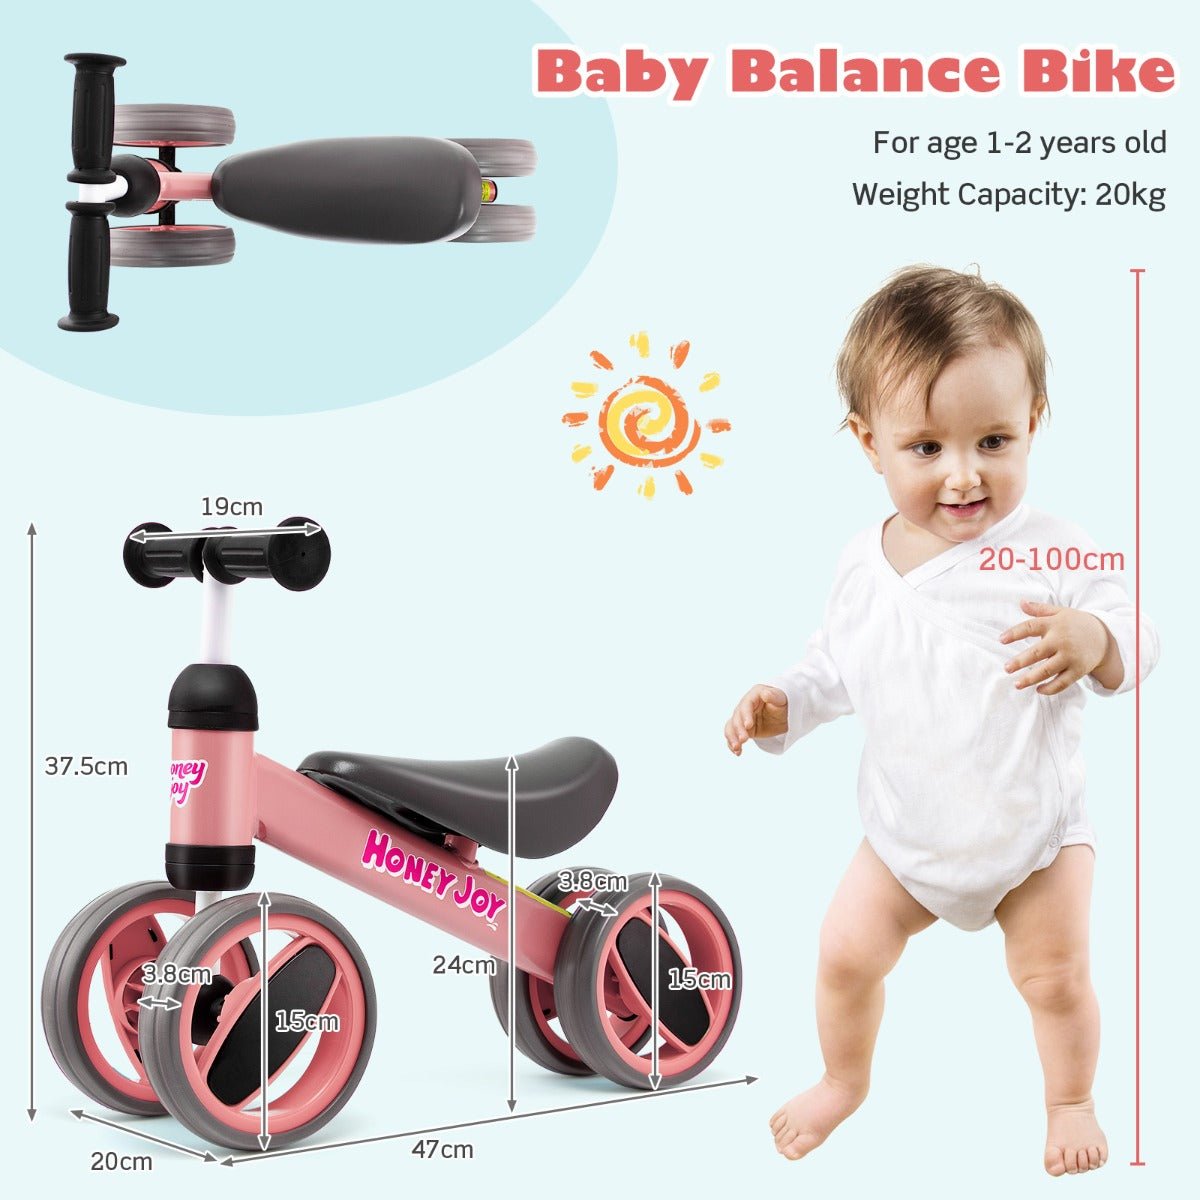 Get Rolling: Pink Baby Balance Bike for Your Toddler